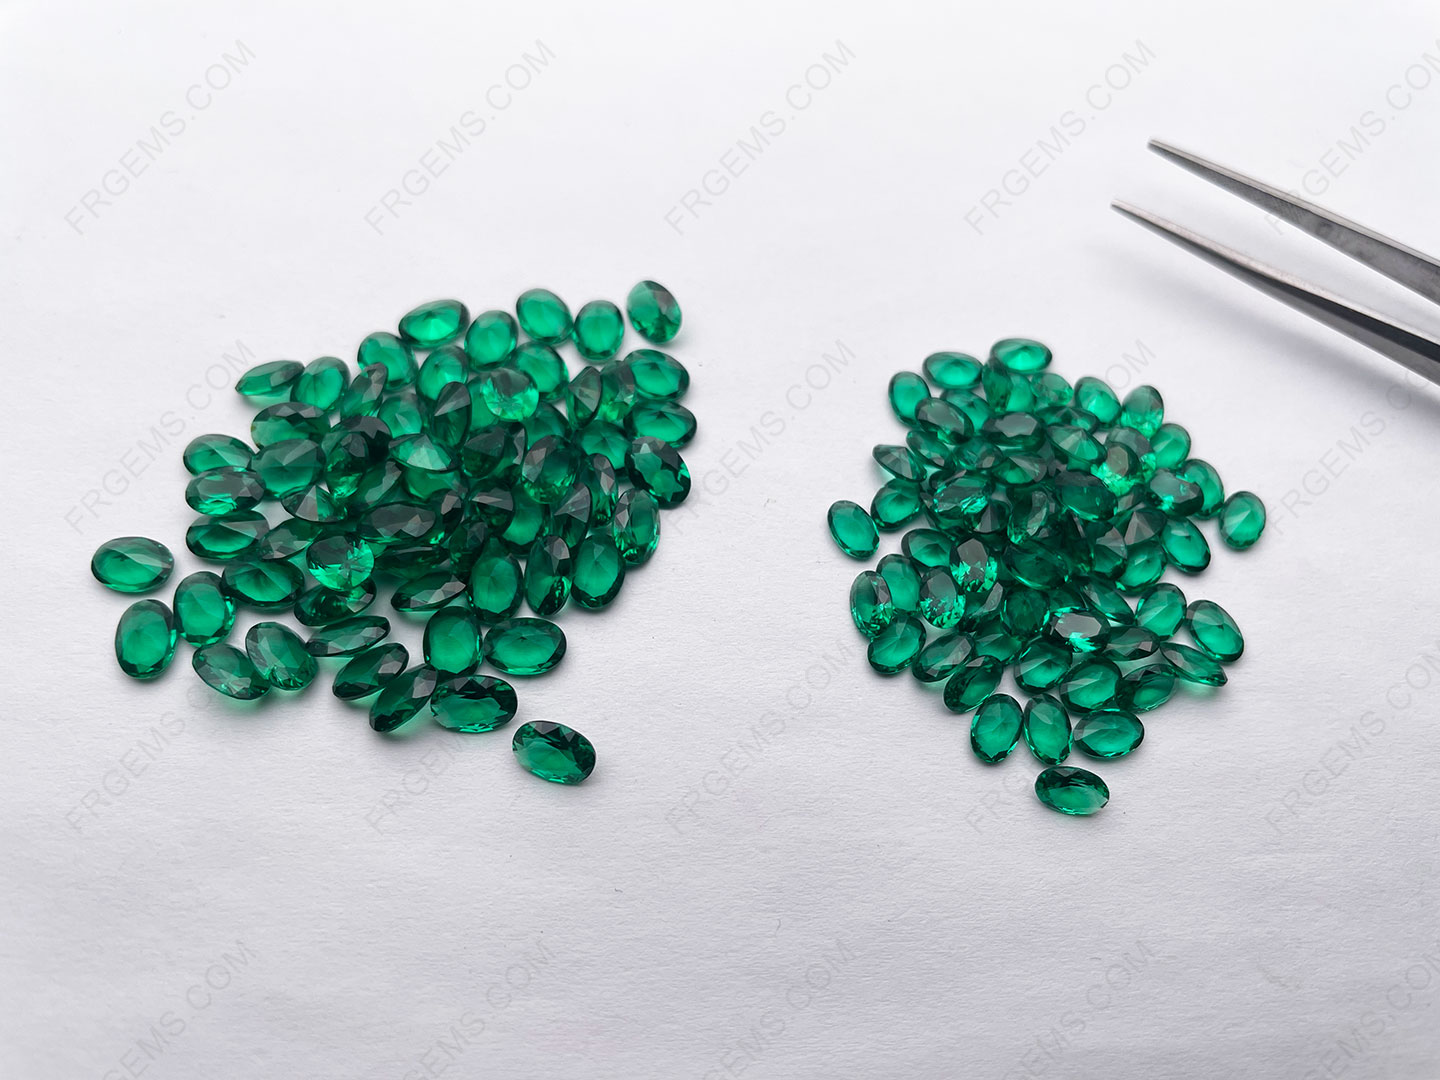 Nano Crystal Emerald Green Dark 111# color Oval faceted cut 5x7mm and 4x6mm gemstones bulk wholesale